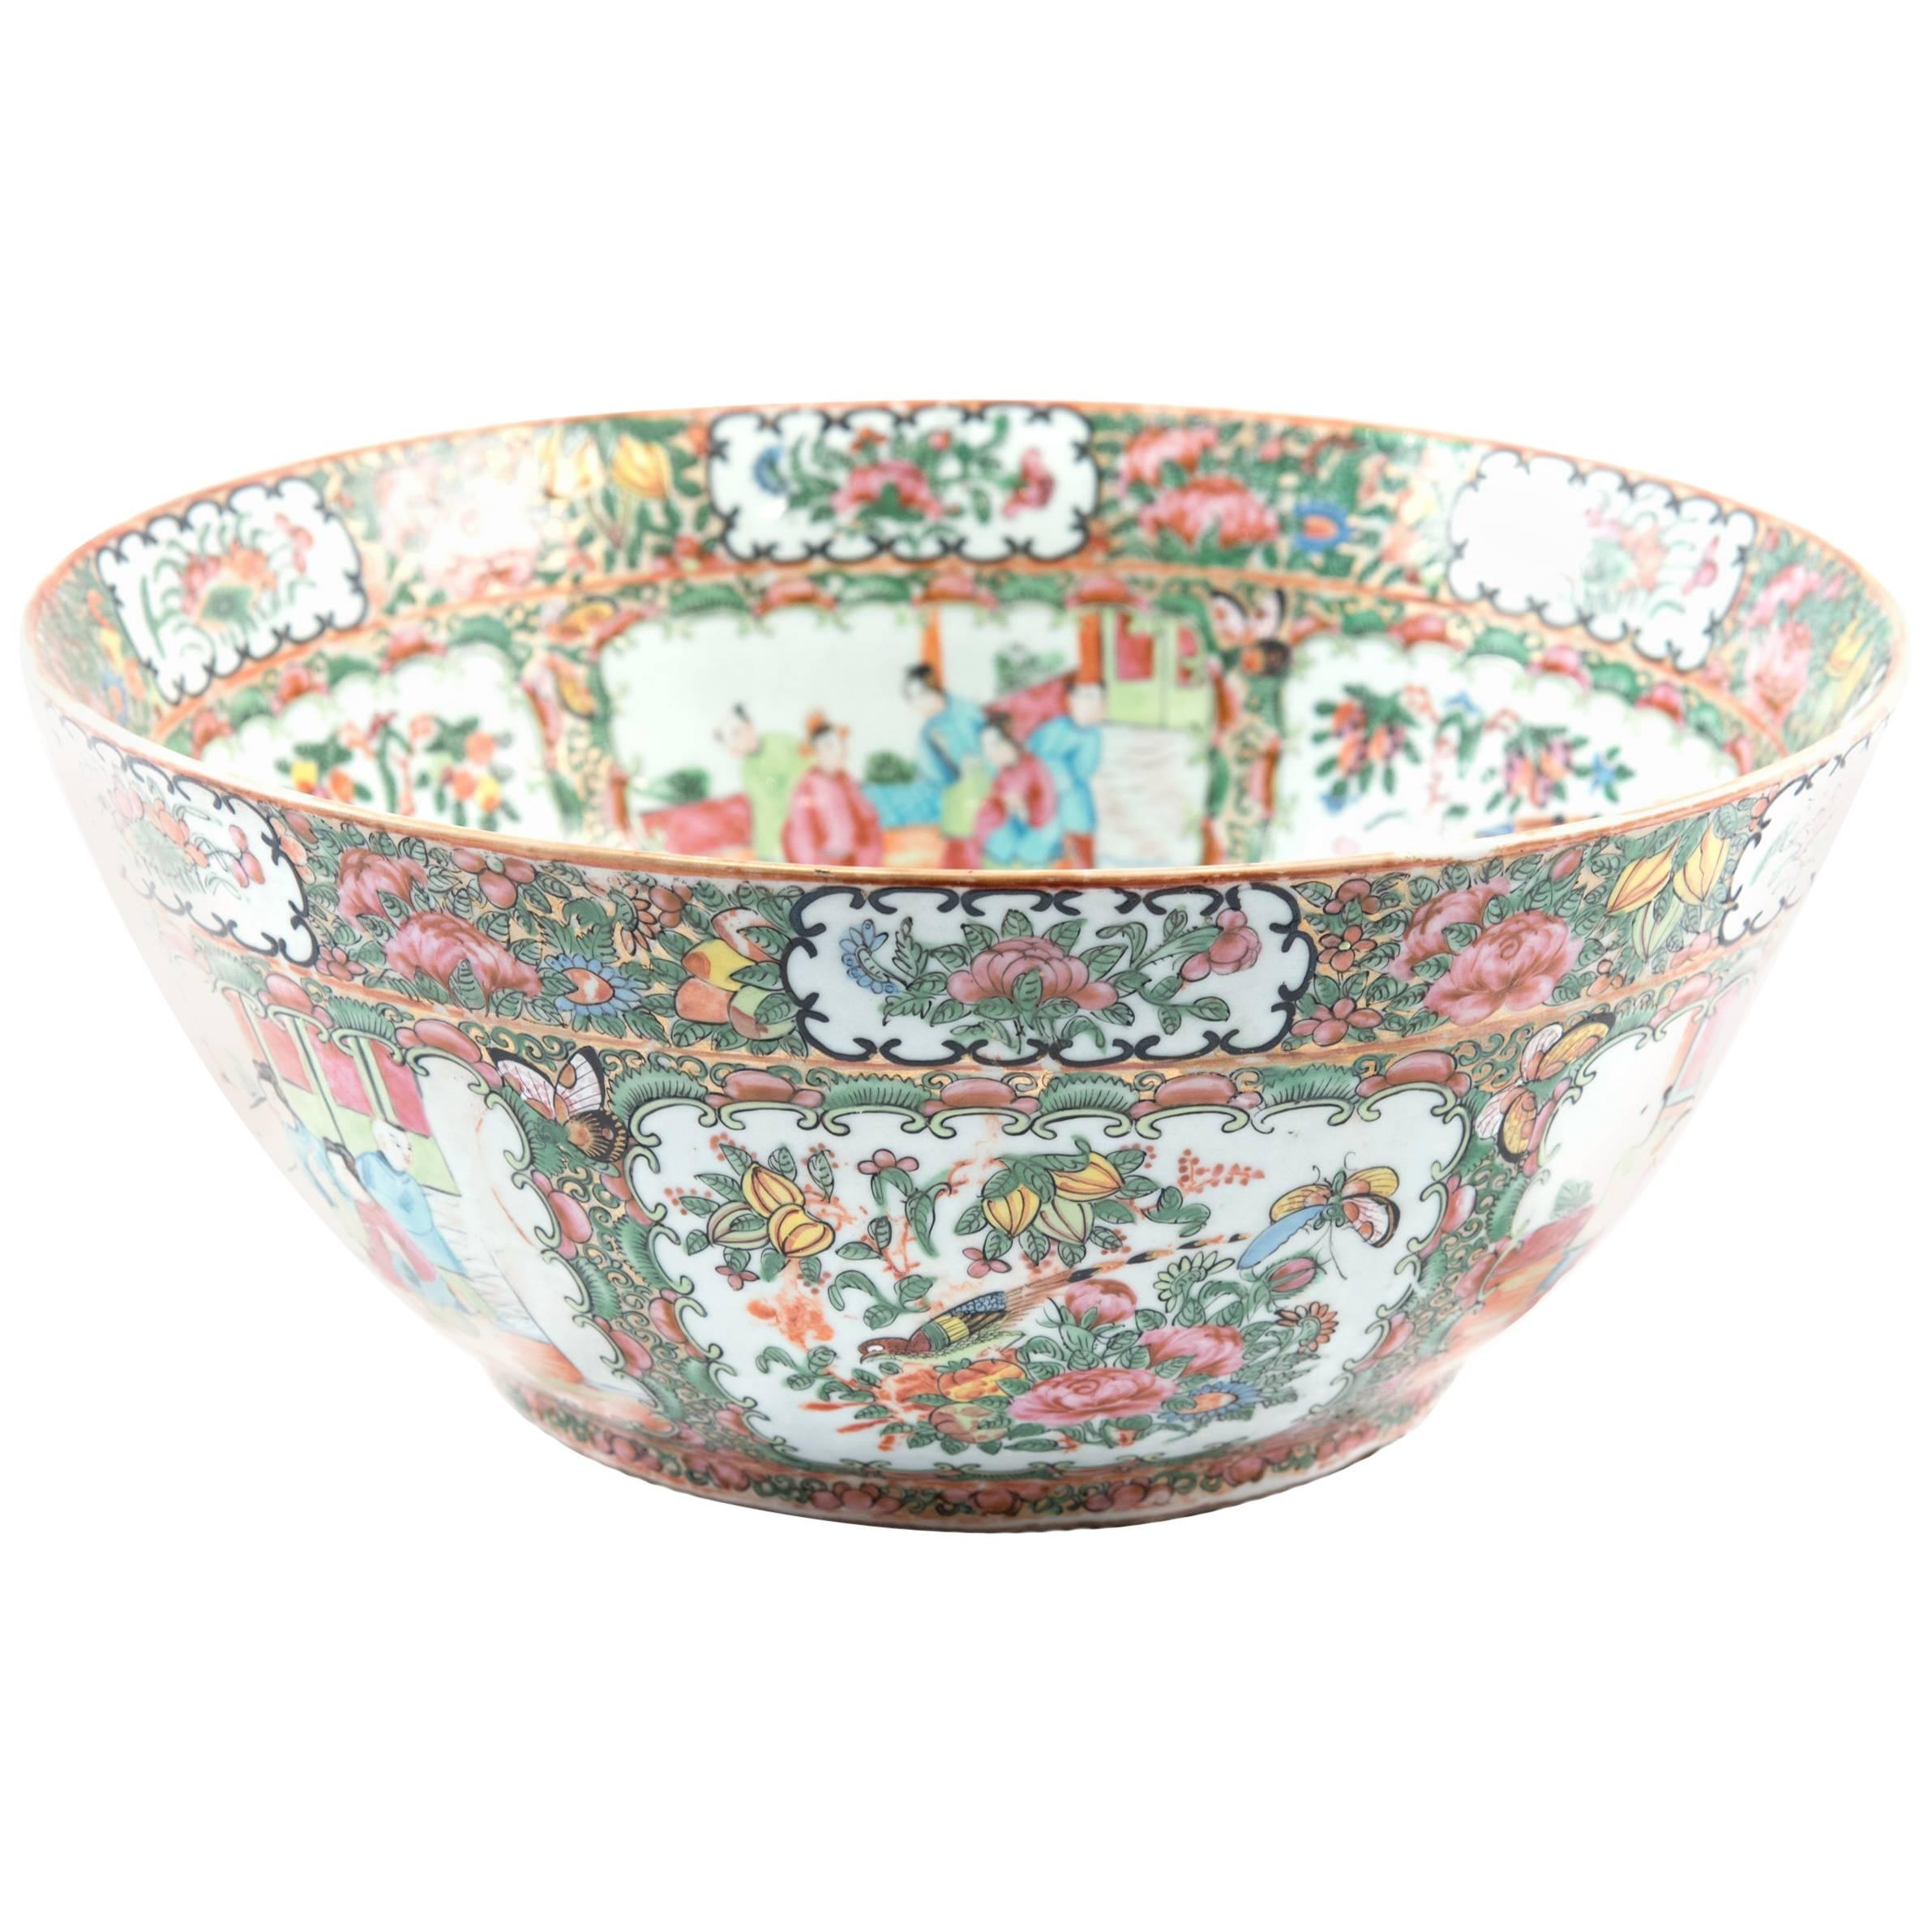 19th Century Chinese Export Famille Rose Porcelain Punch Bowl